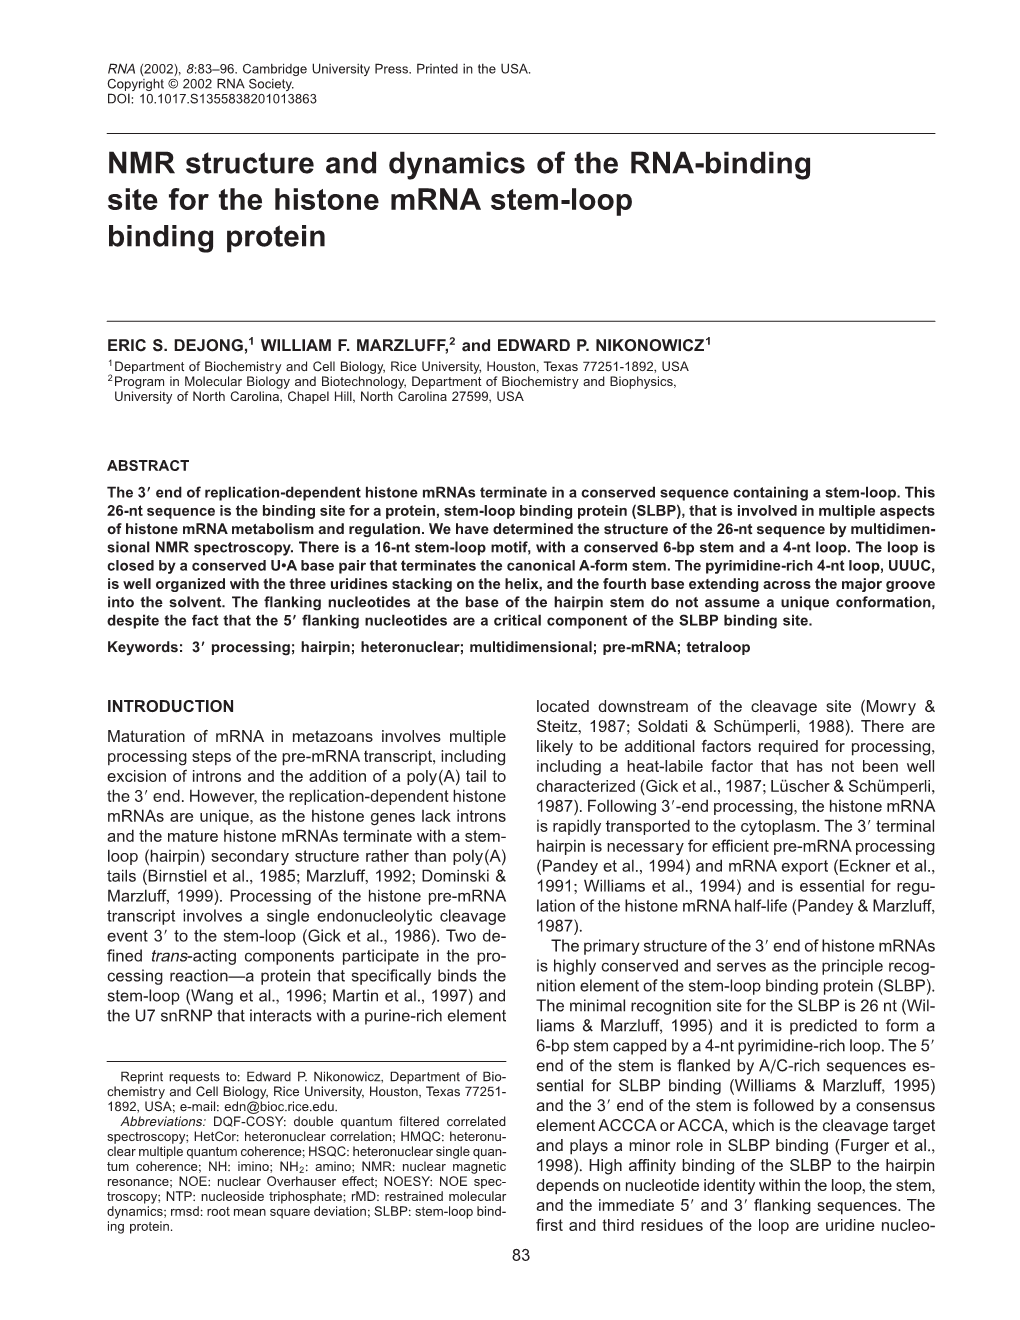 NMR Structure and Dynamics of the RNA-Binding Site for the Histone Mrna Stem-Loop Binding Protein